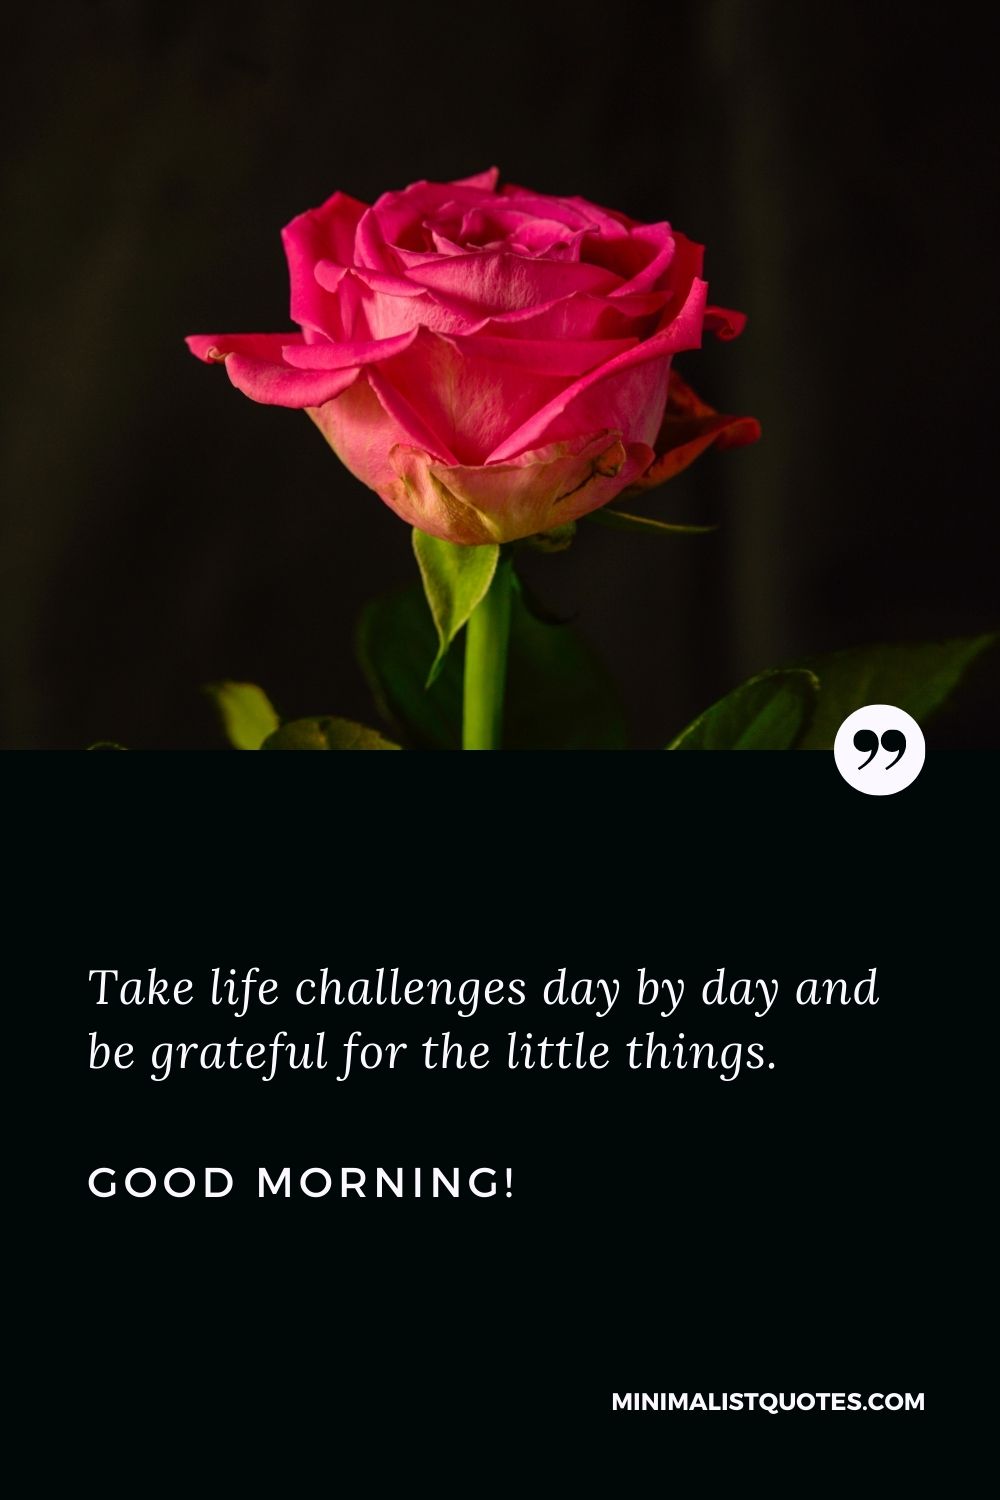 Take life challenges day by day and be grateful for the little ...